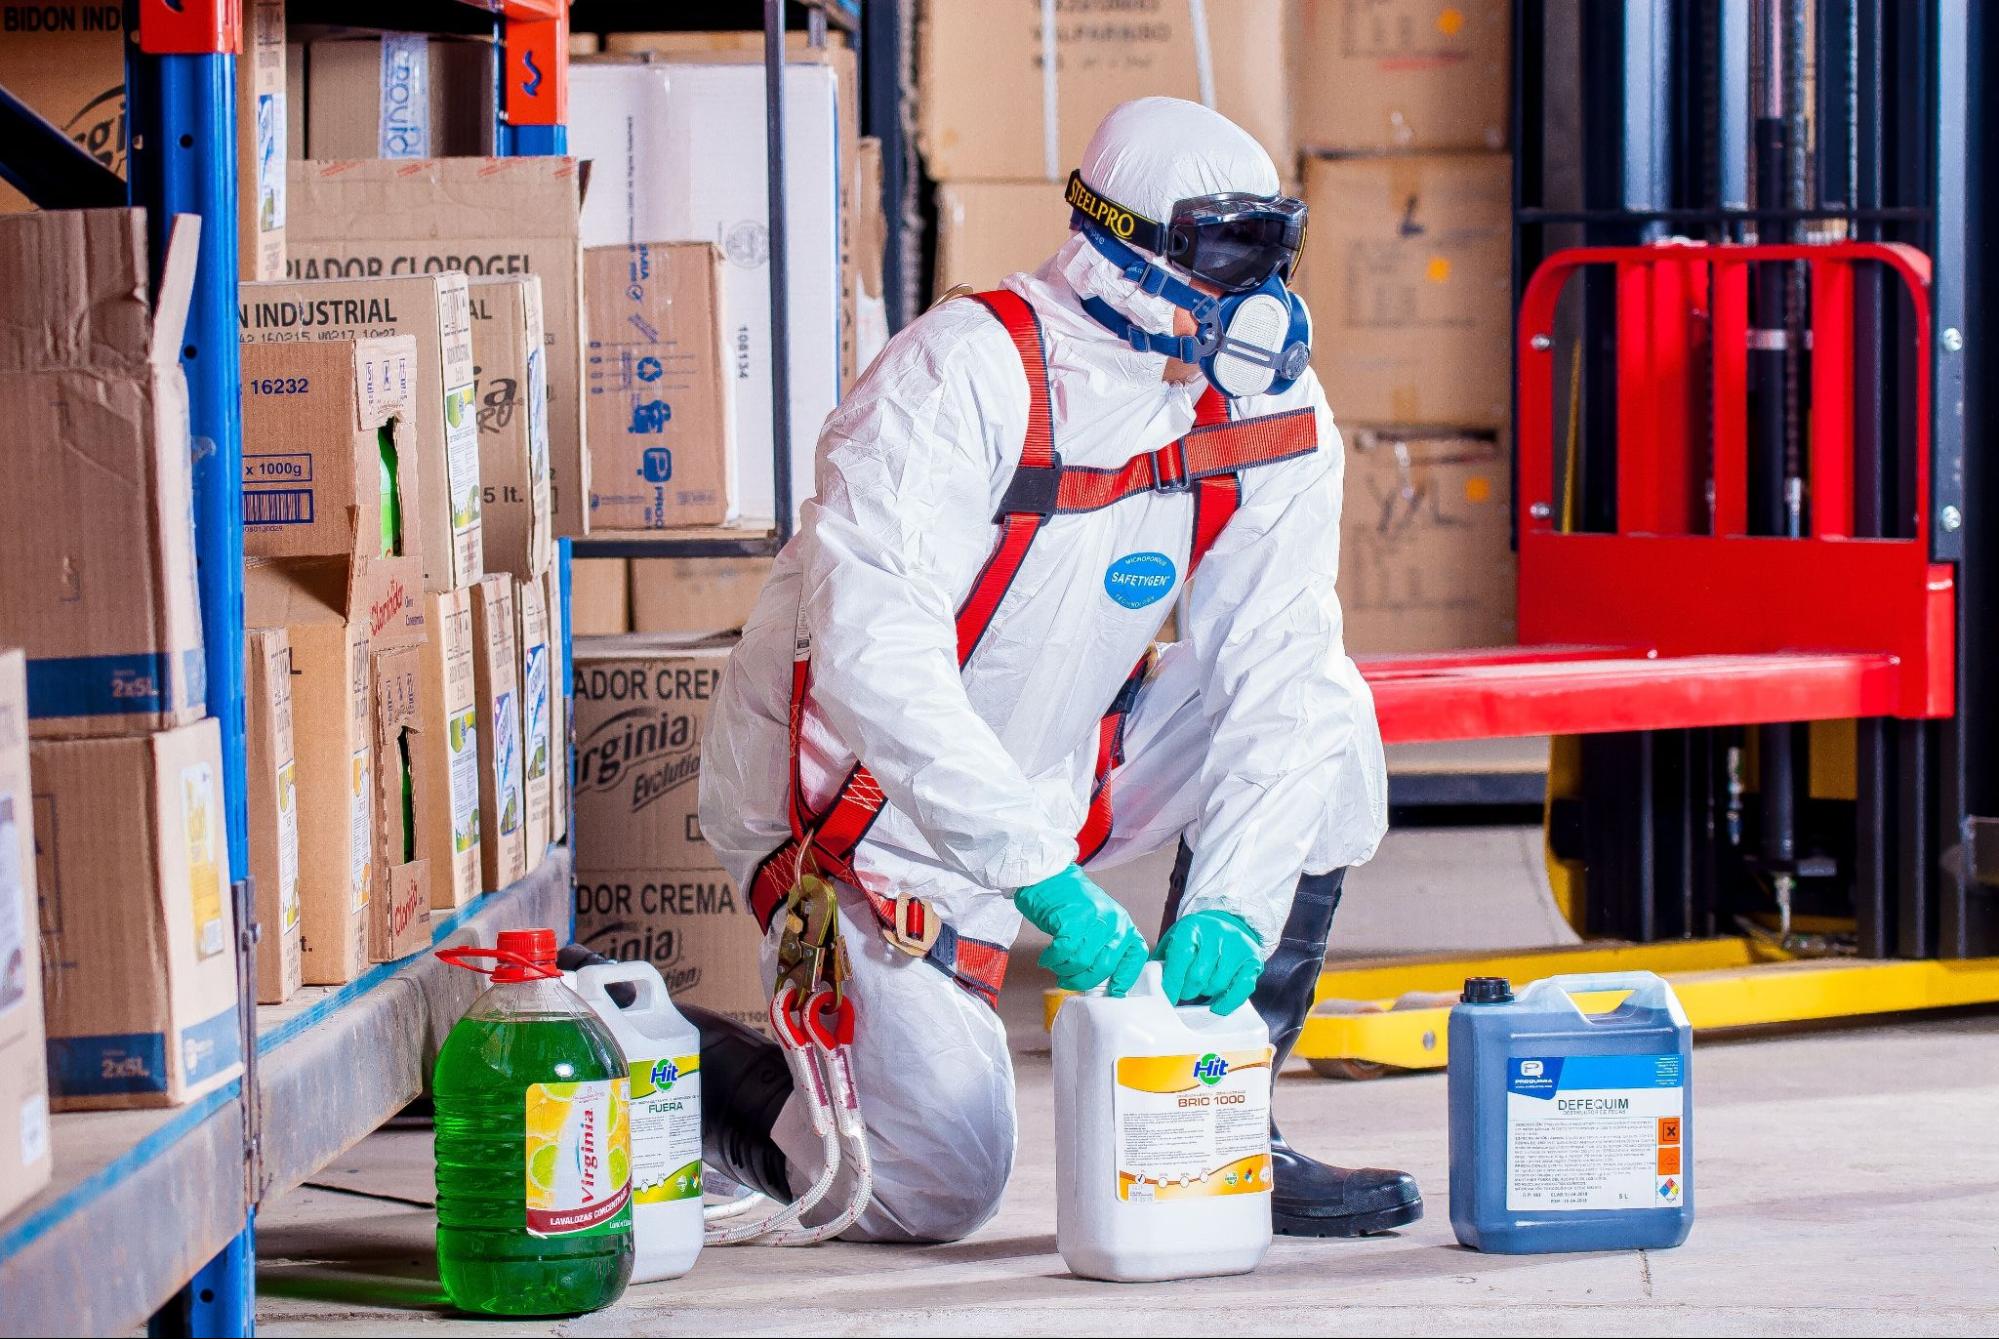 Worker handling chemicals with full protective clothing